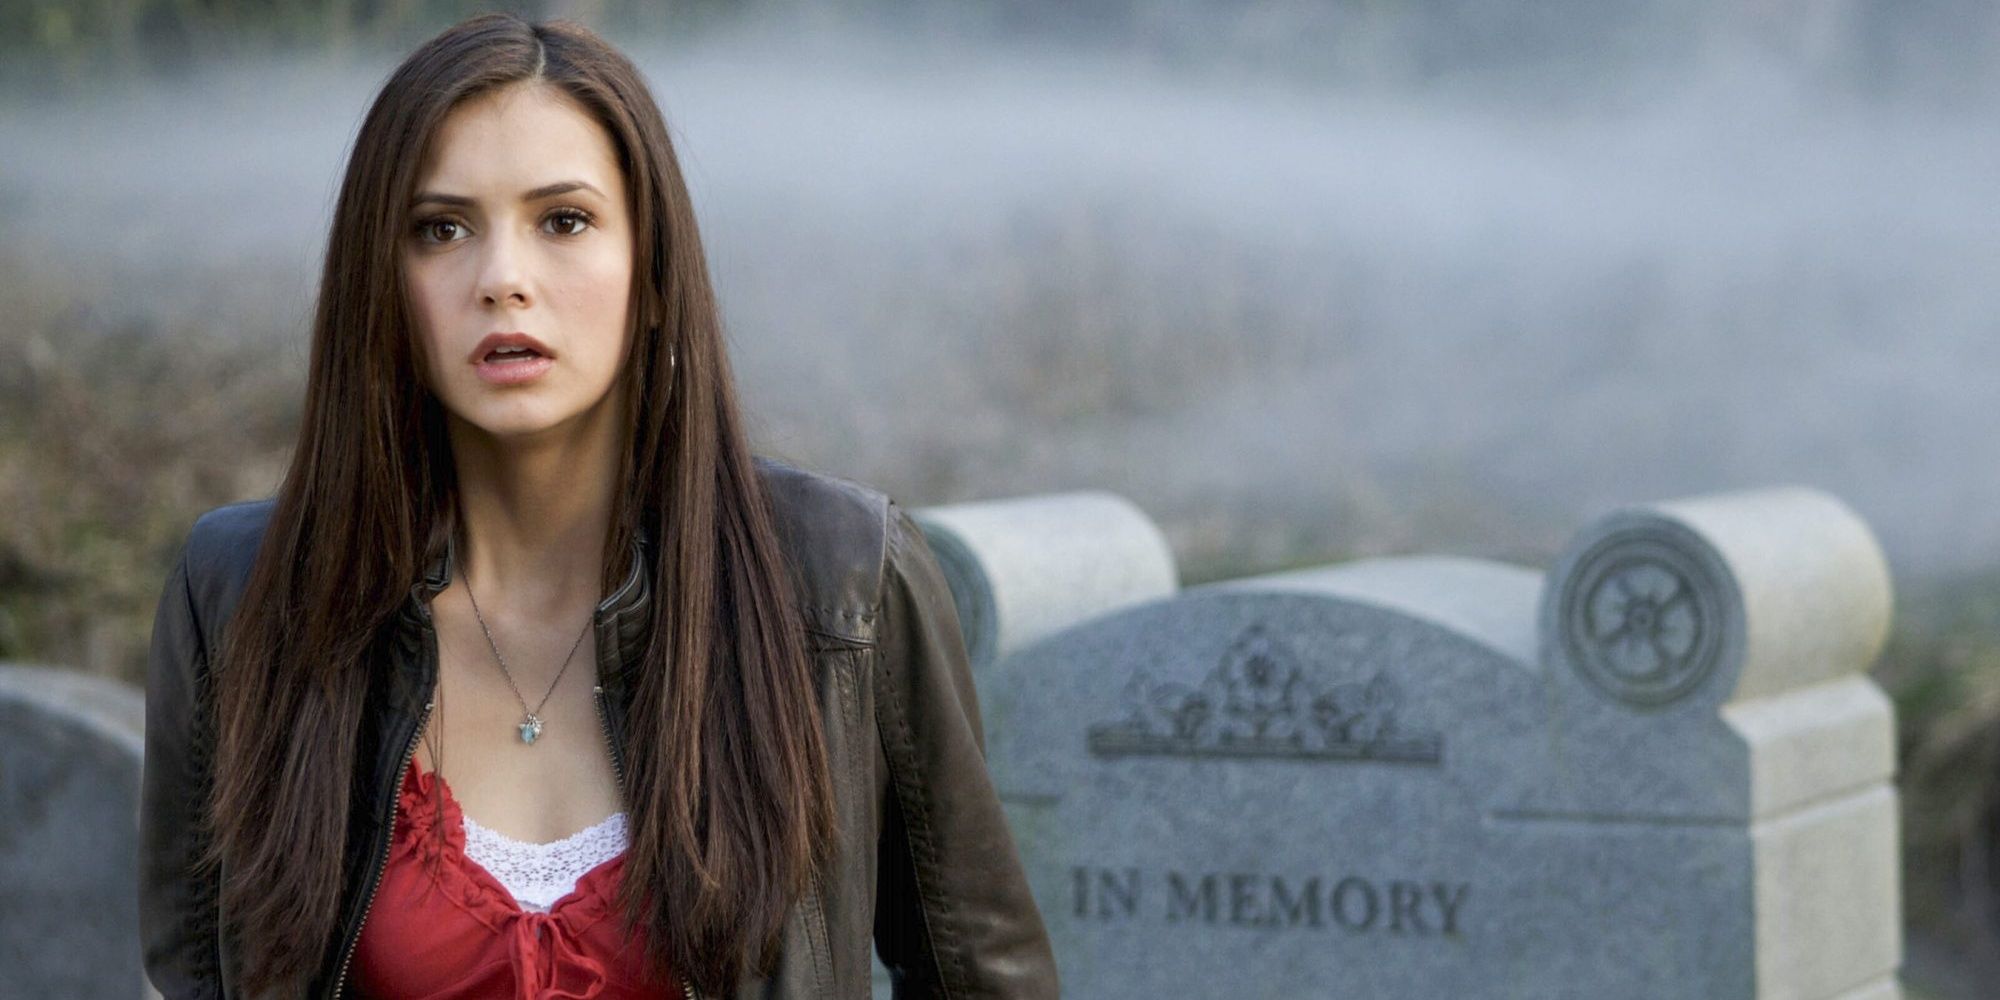 The Vampire Diaries 4 Heroes Fans Hated (& 4 Villains They Loved)